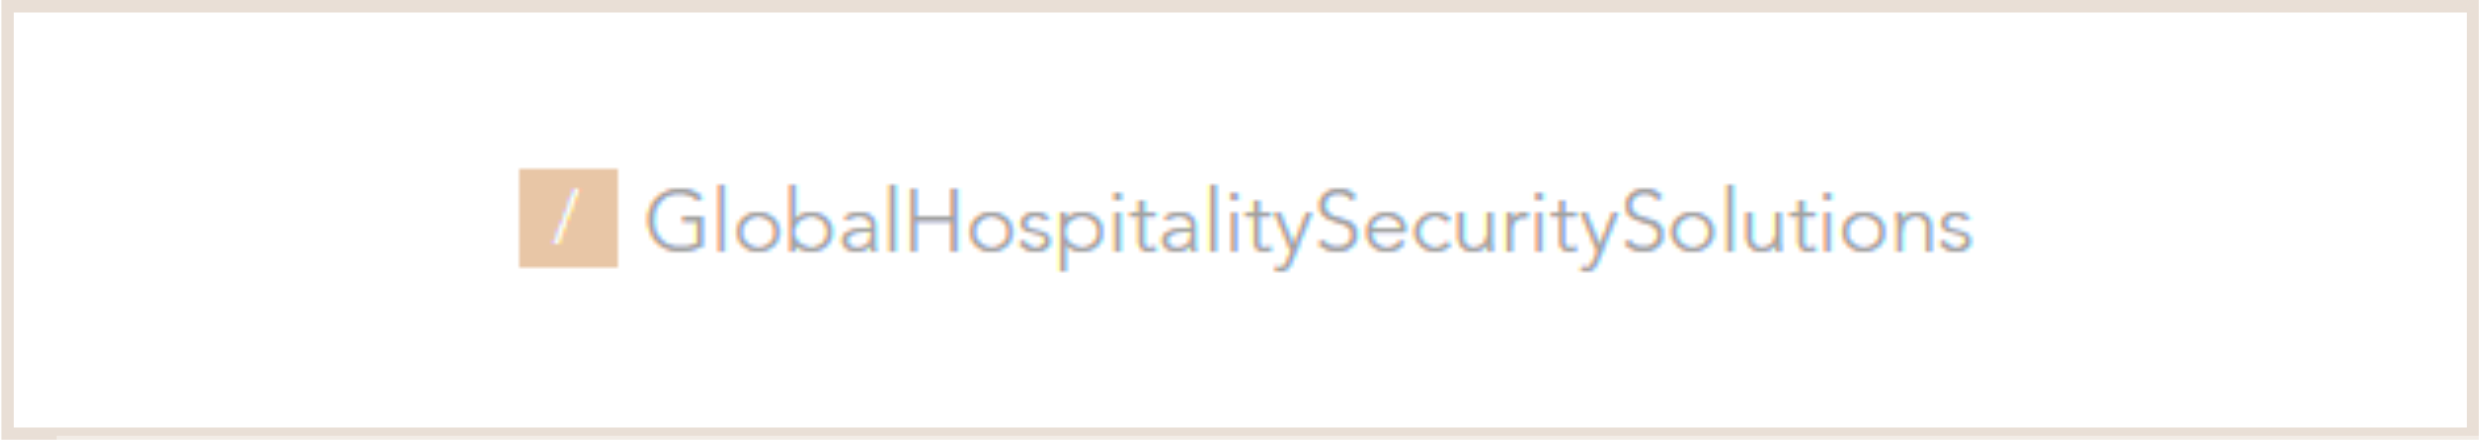 Global Hospitality Security Solutions